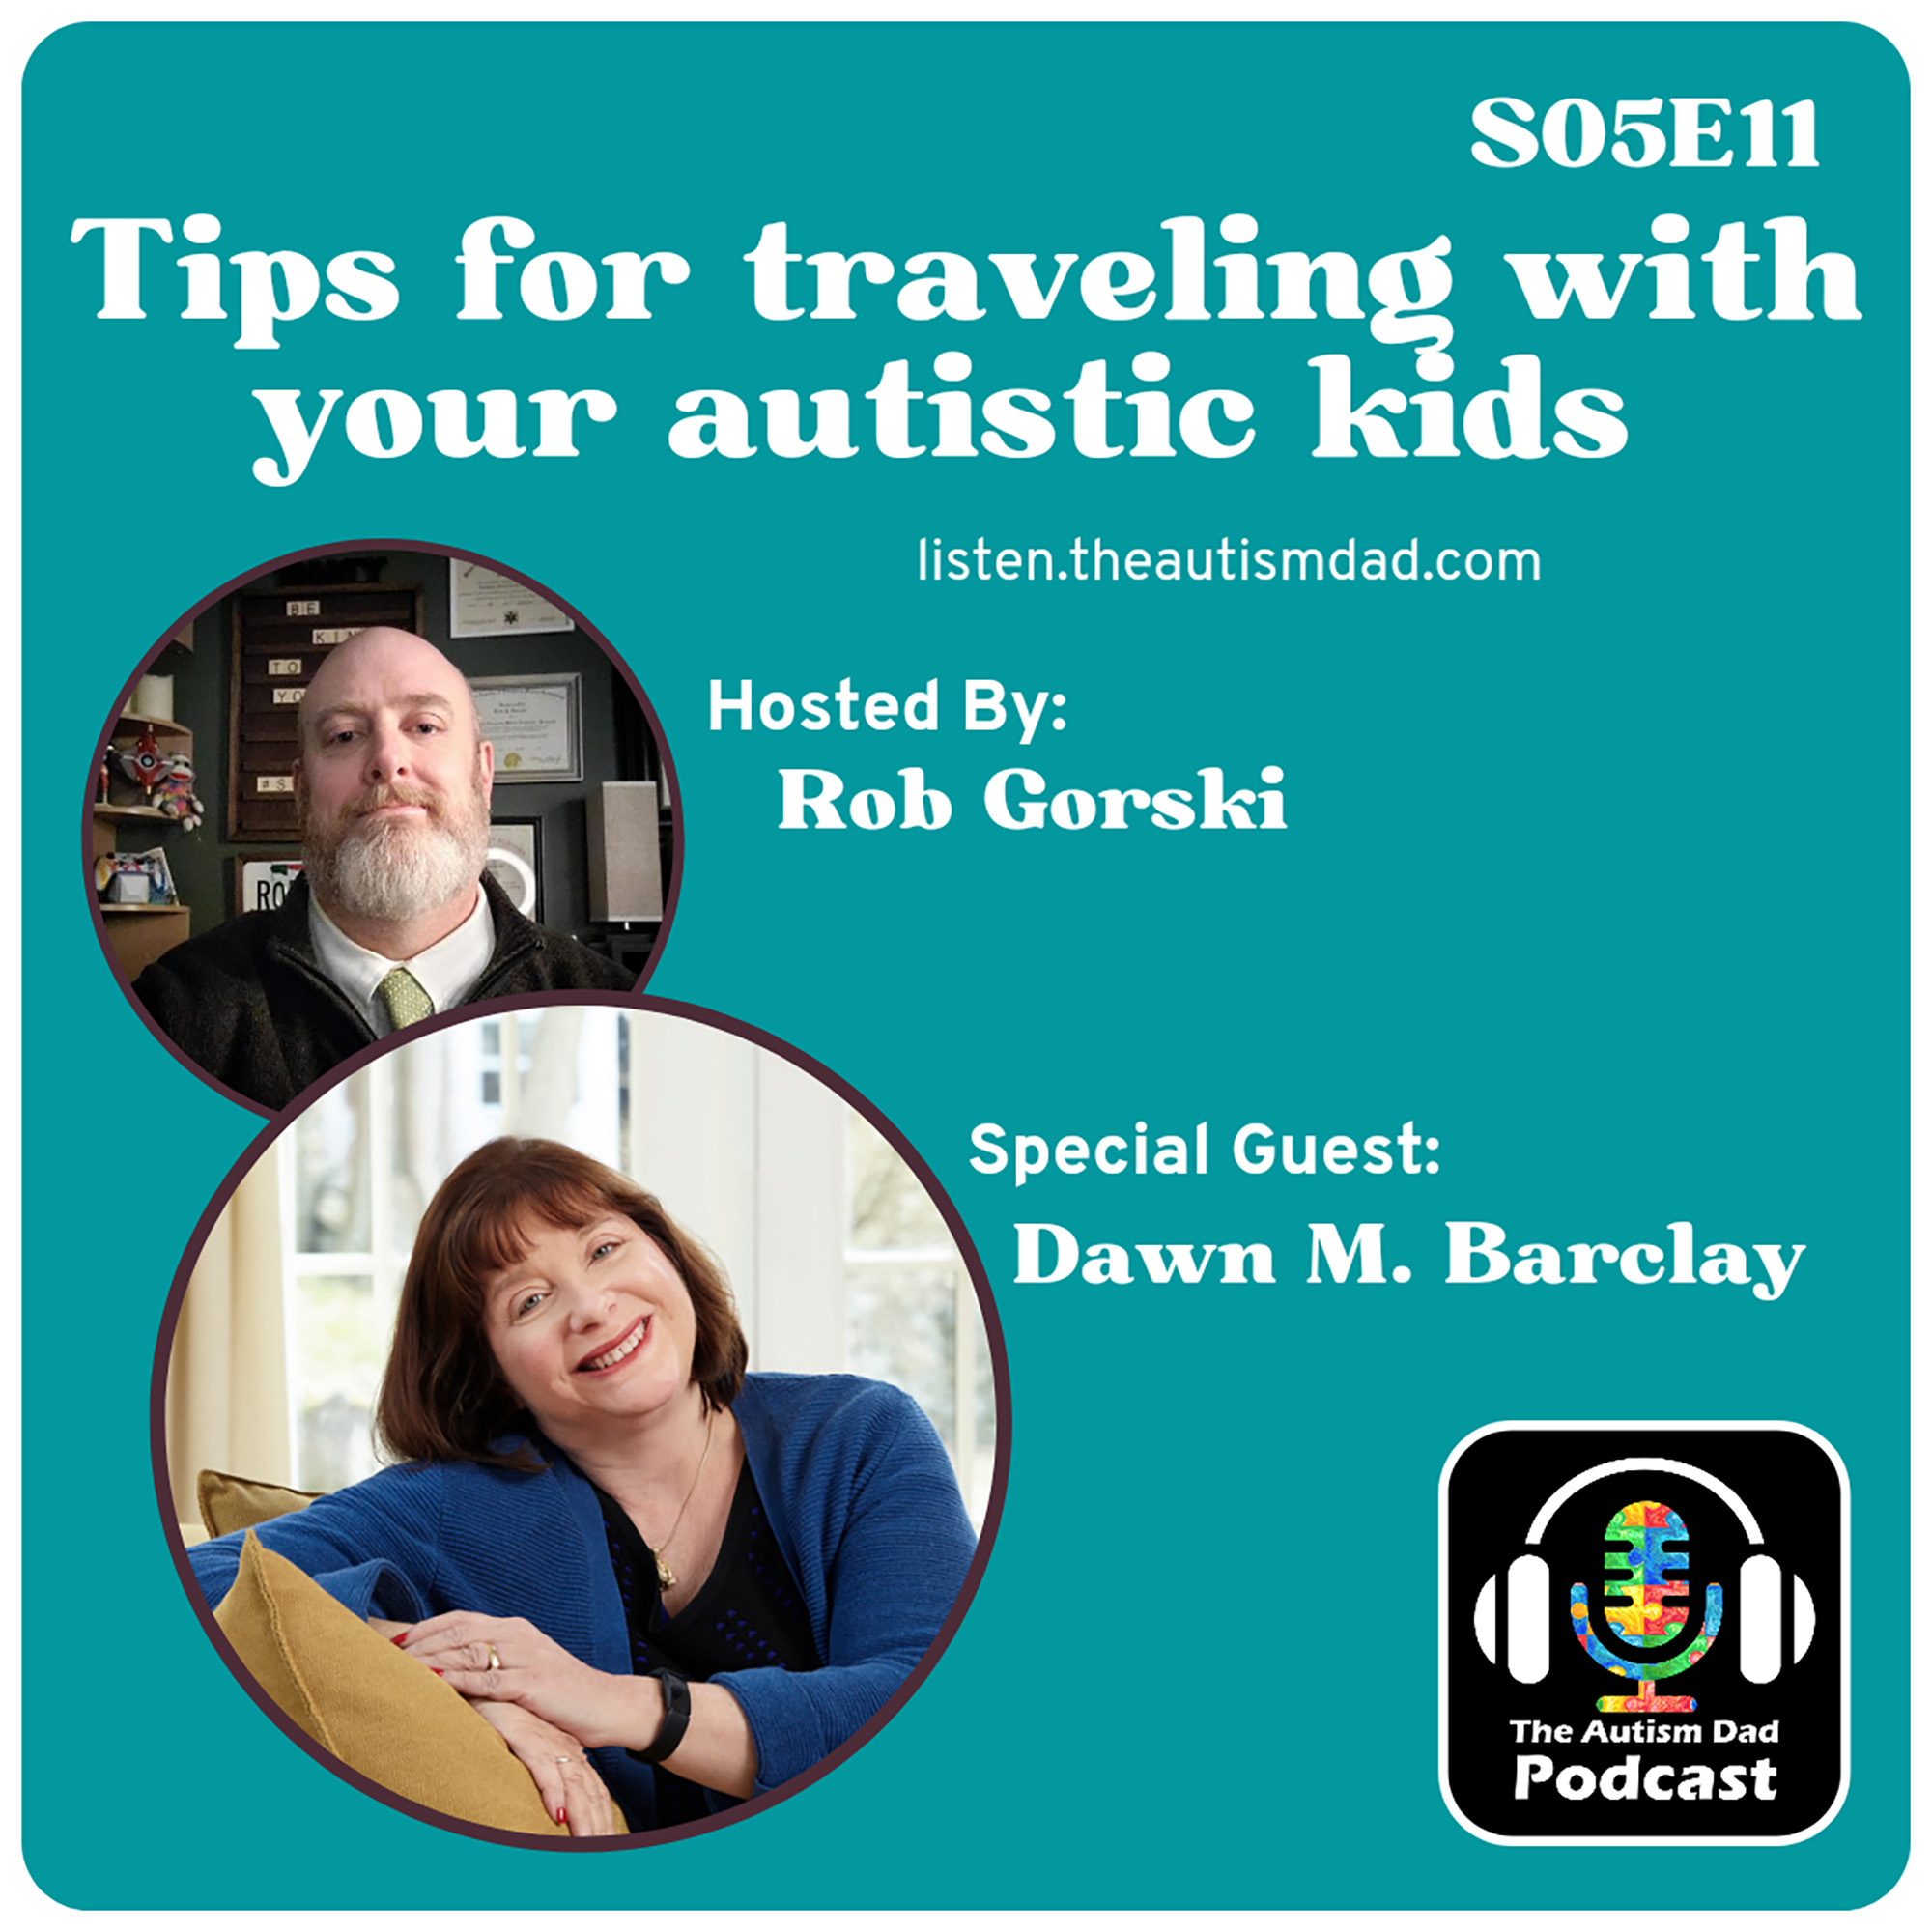 Artwork for podcast The Autism Dad Podcast